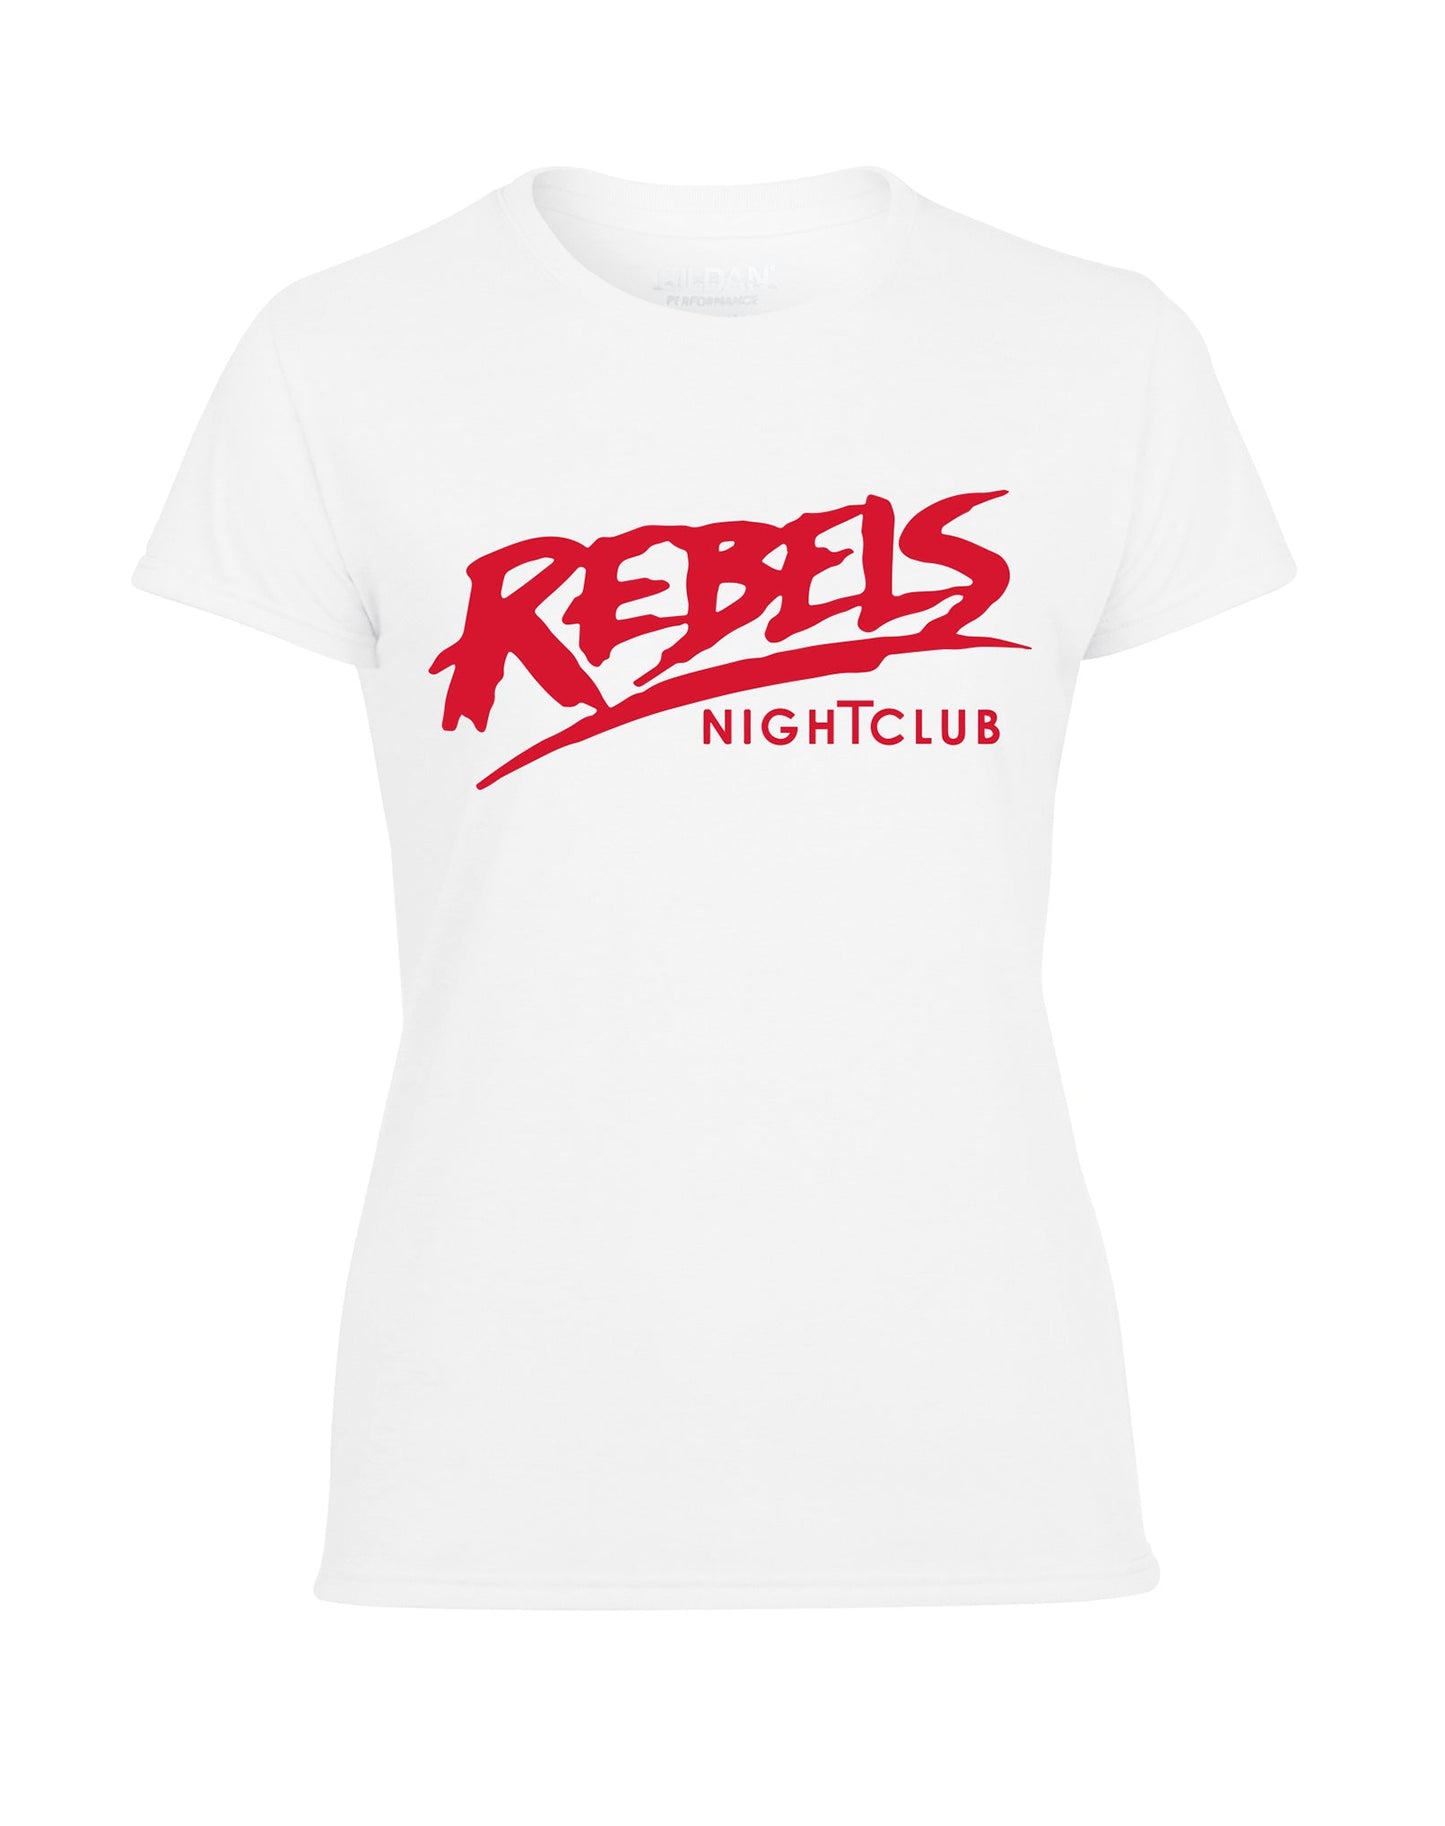 Rebels Sign ladies fit T-shirt - various colours - Dirty Stop Outs